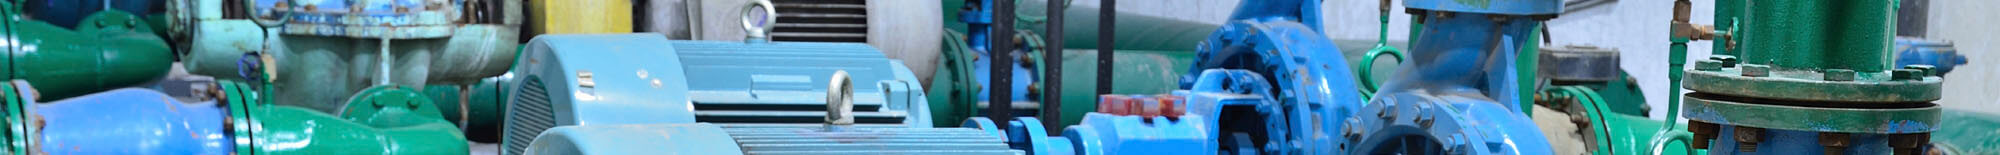 About Pump Engineering, Rotating Equipment, Industrial Pumps, Parts & Service